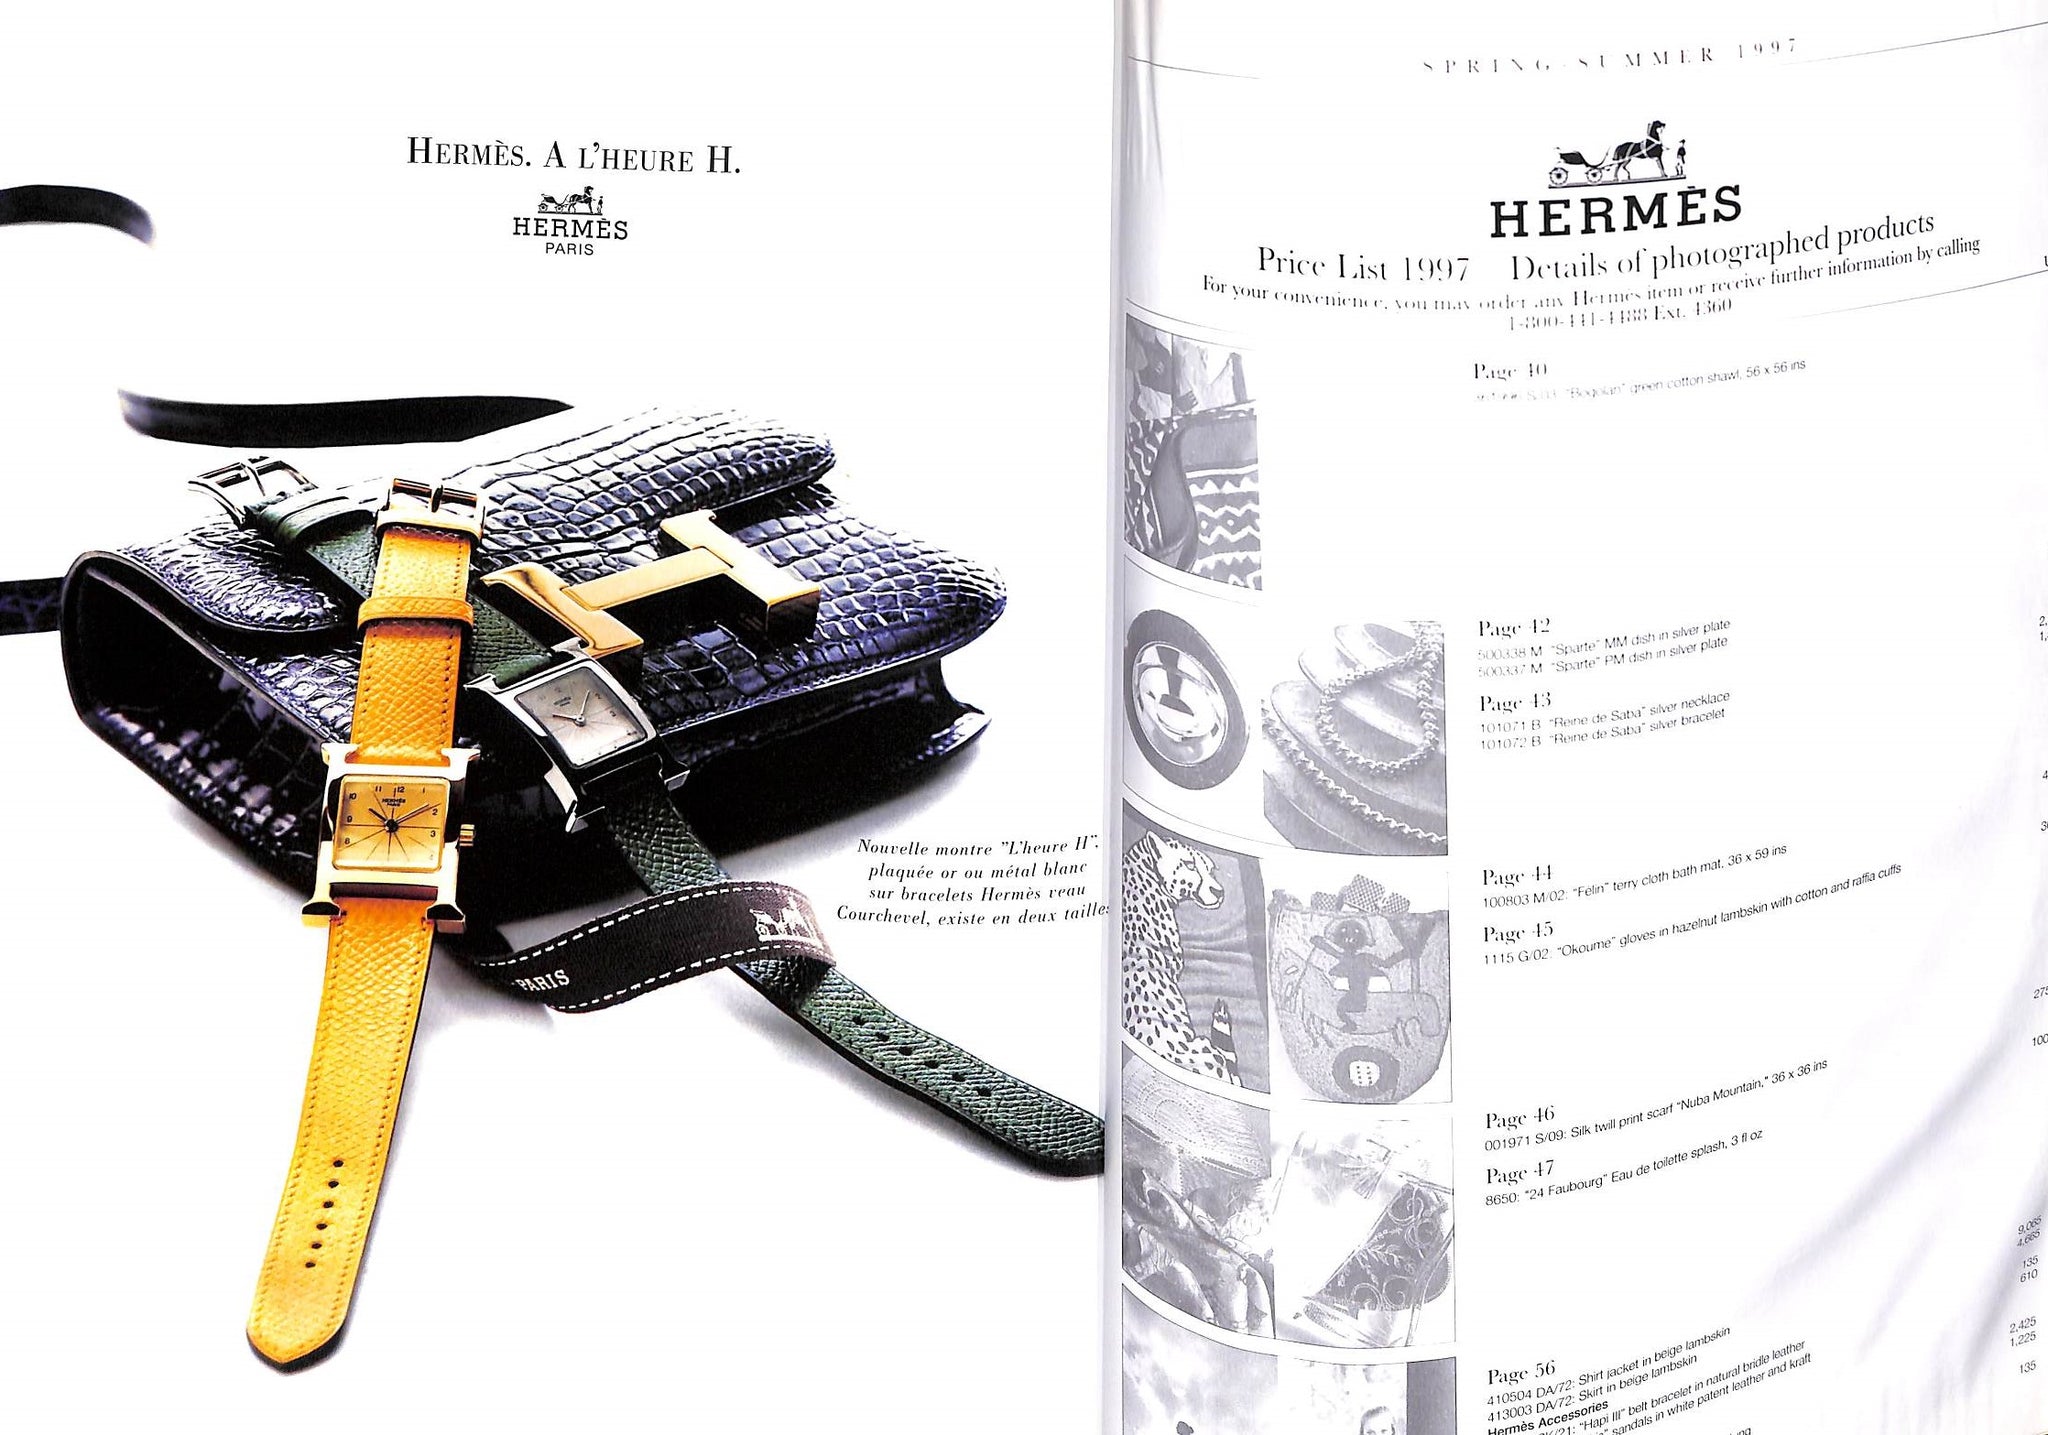 Every Season Hermes reinvents its Classics – The World of Hermes